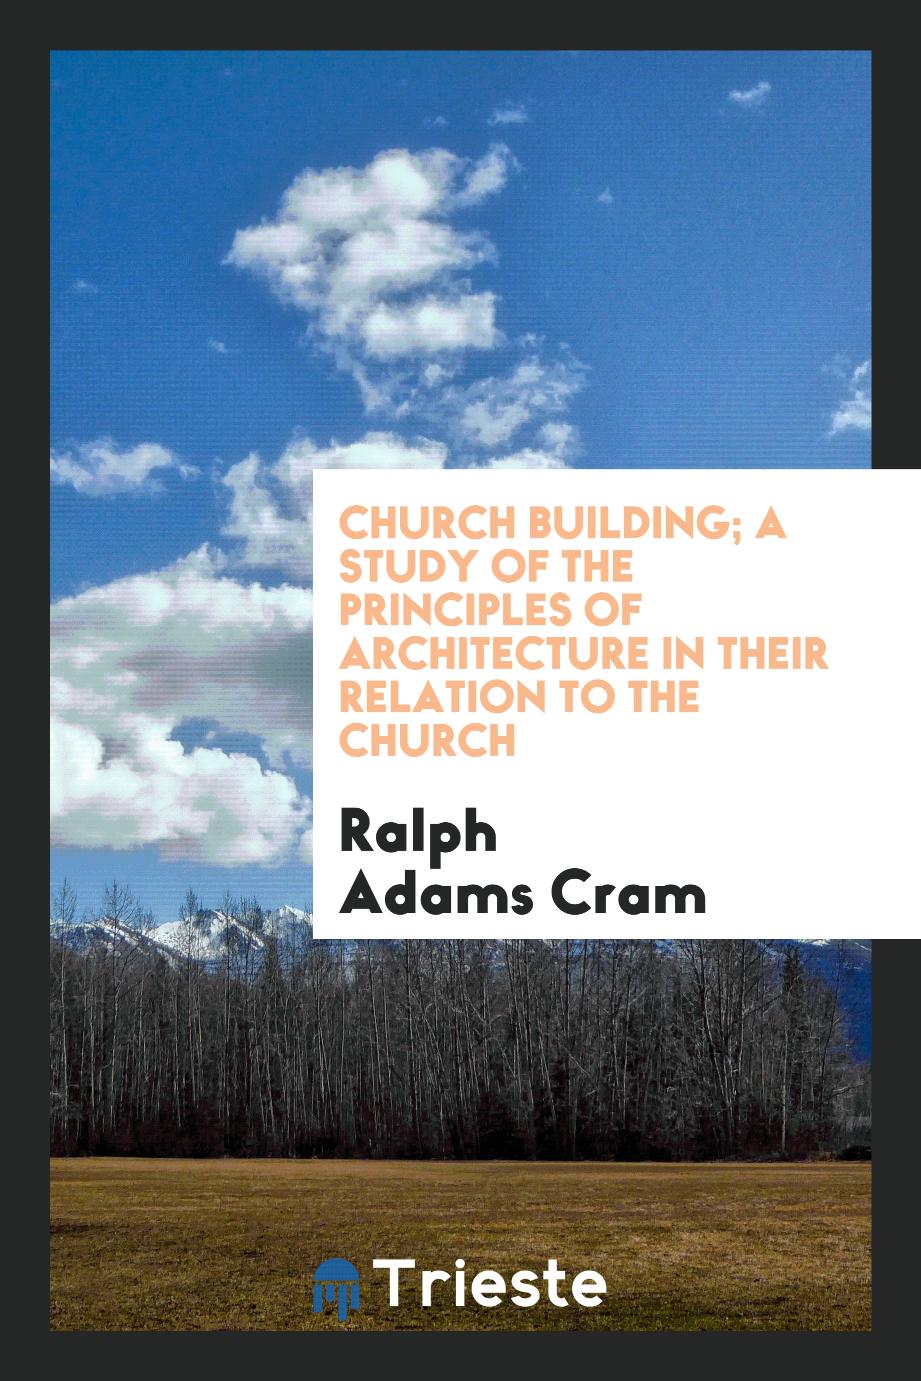 Church building; a study of the principles of architecture in their relation to the church